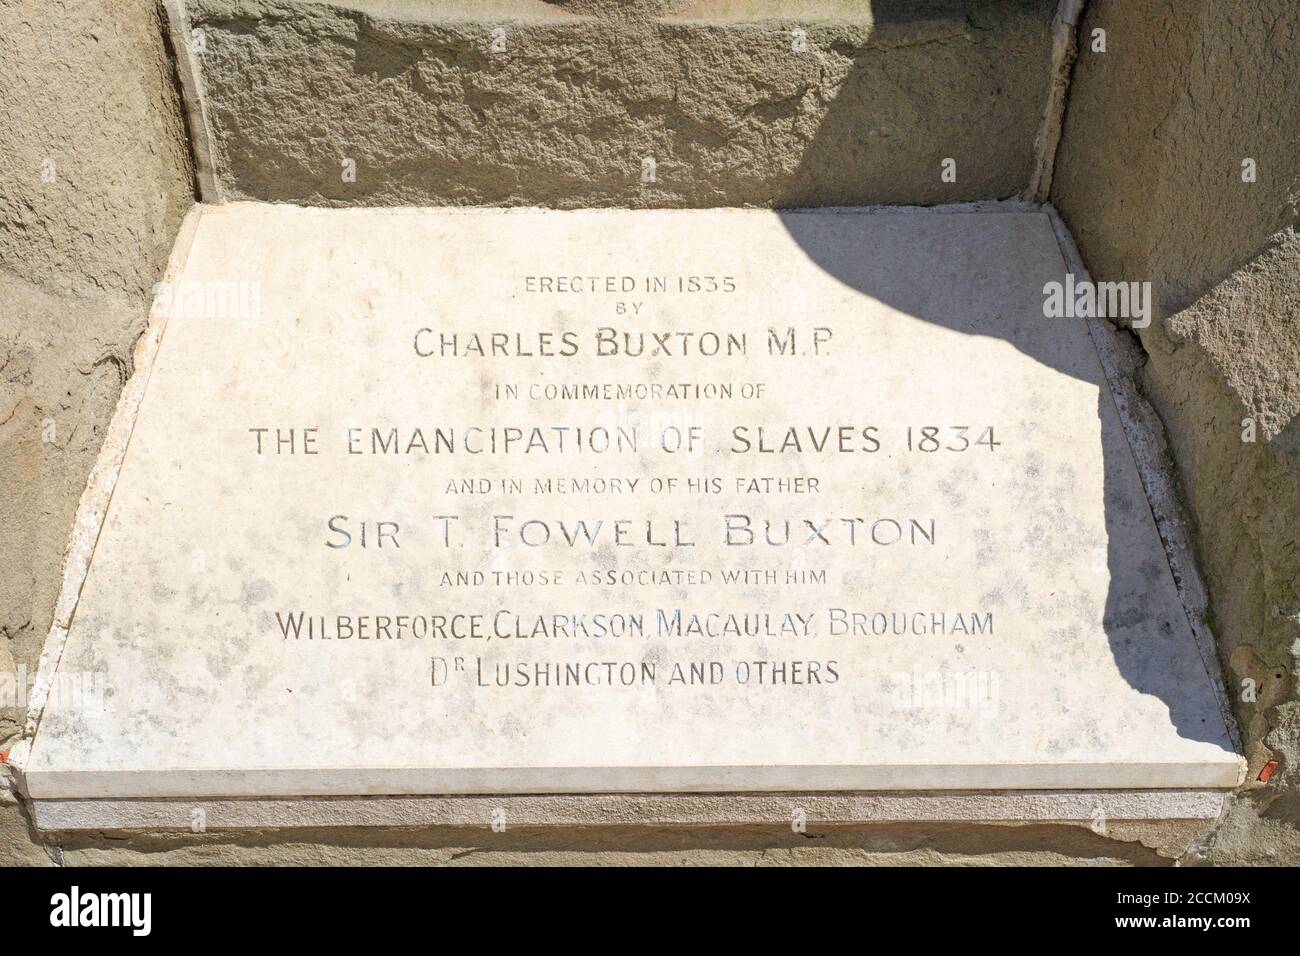 Emancipation of slaves plaque, London, 2020.  A memorial plaque commemmoeating the abolition of the slave trade in 1834.  This sits below an ornate fo Stock Photo